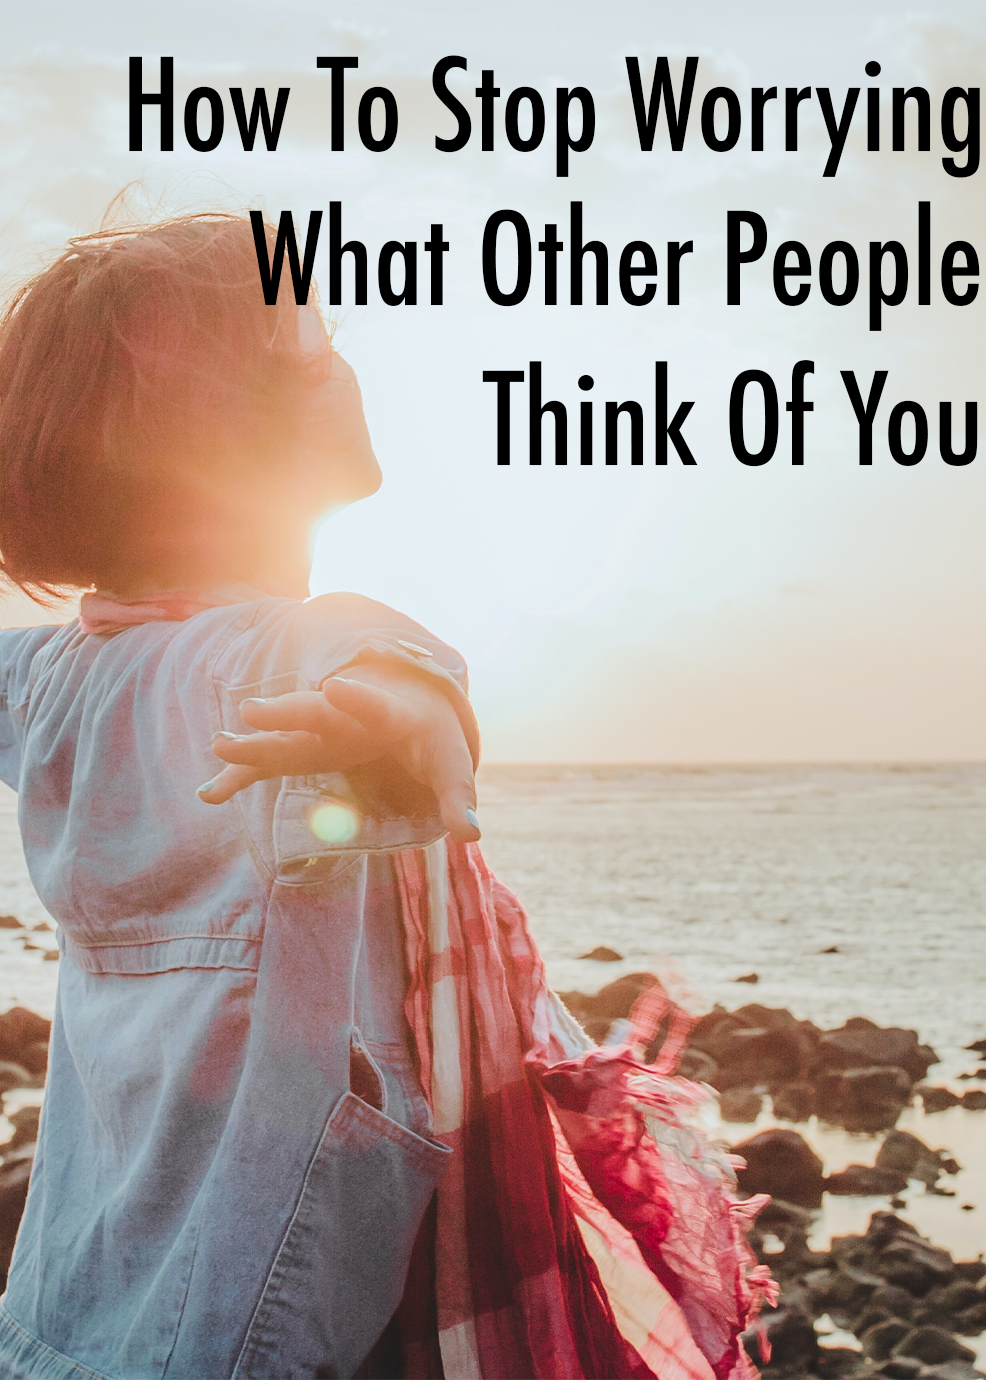 How To Stop Worrying What Other People Think Of You Video